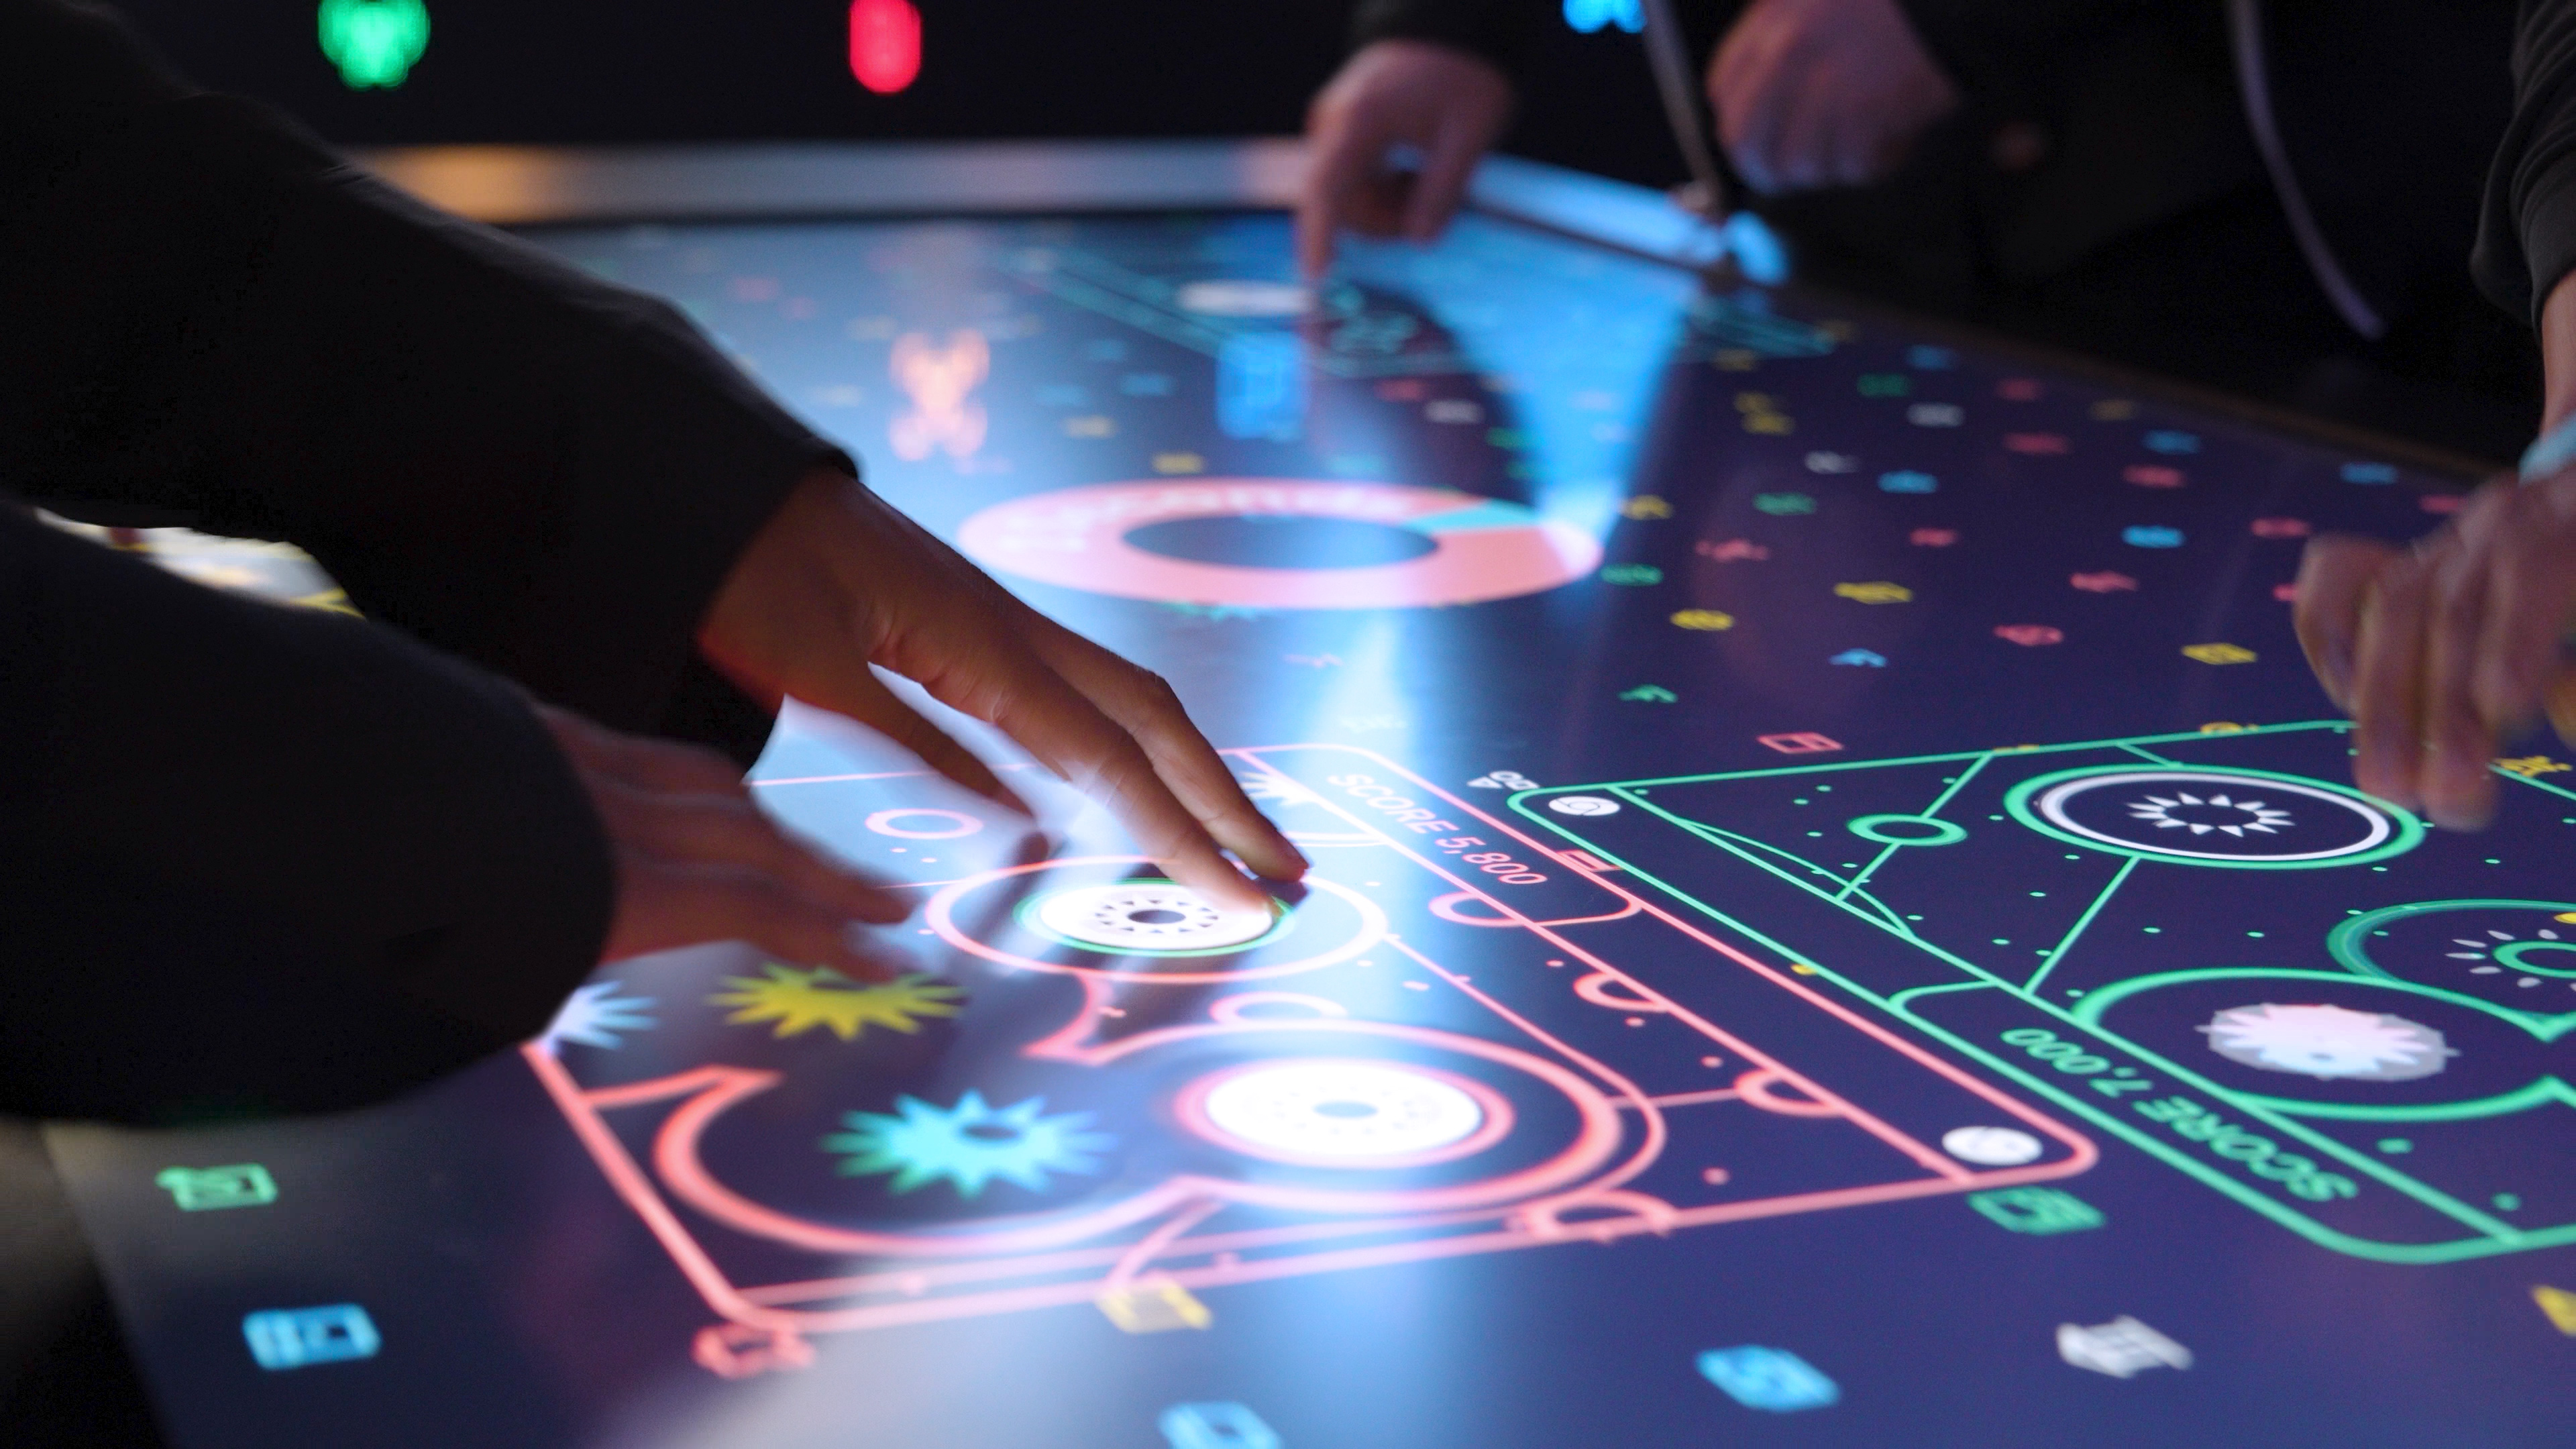 A close up of Bloomberg Technology Summit attendees hands, playing the colorful Data Defense Game on a touchtable. The display shows stylized Google Chrome windows with files being scanned for threats.